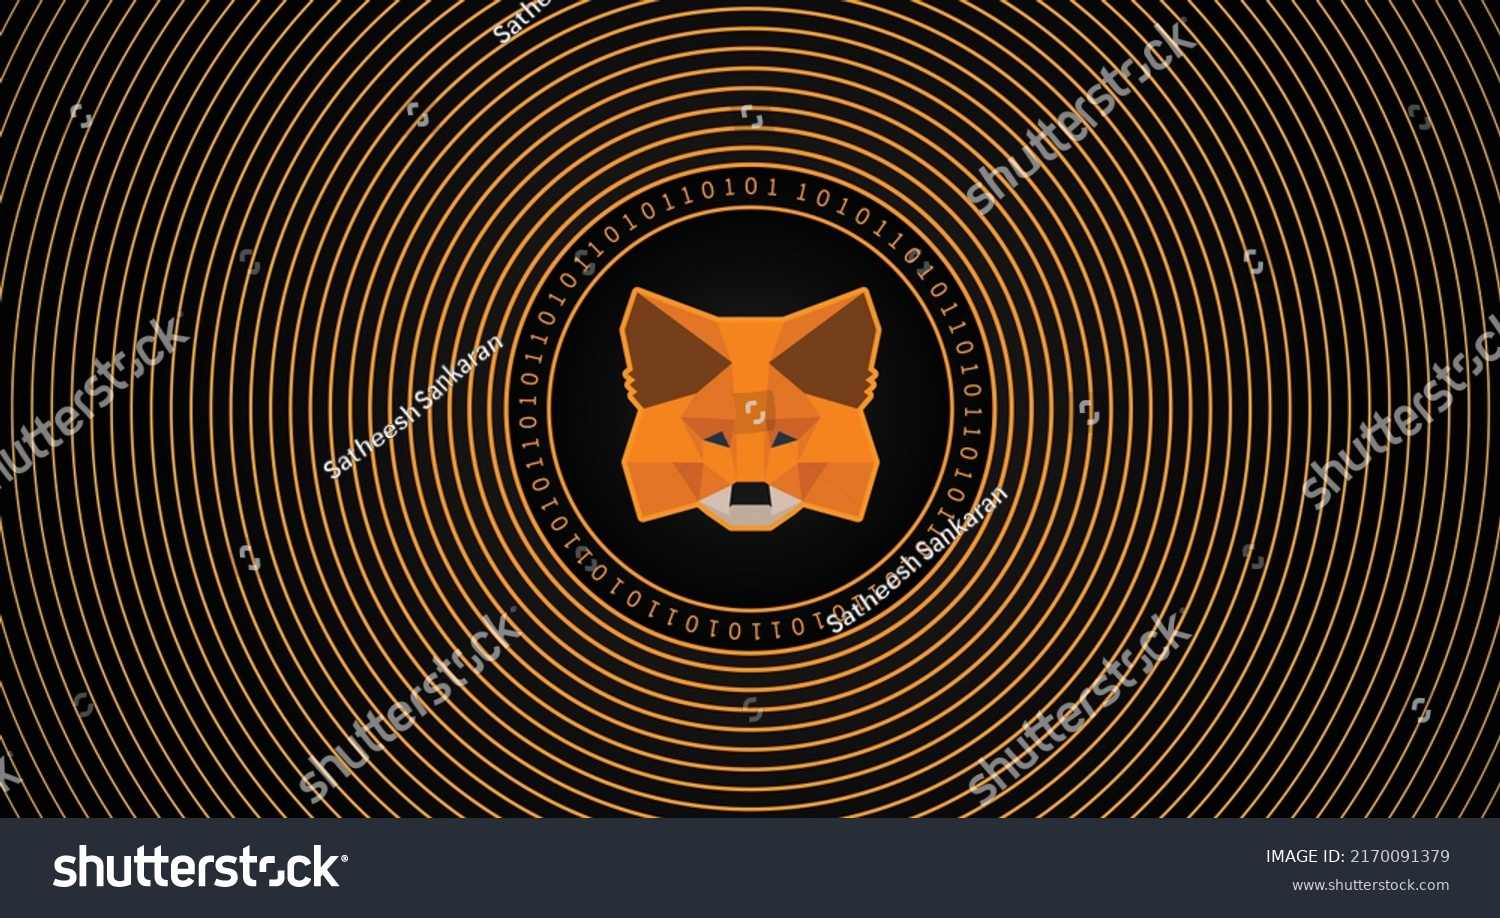 SVG of Metamask crypto currency trading exchange logo vector technology banner illustration template.  svg